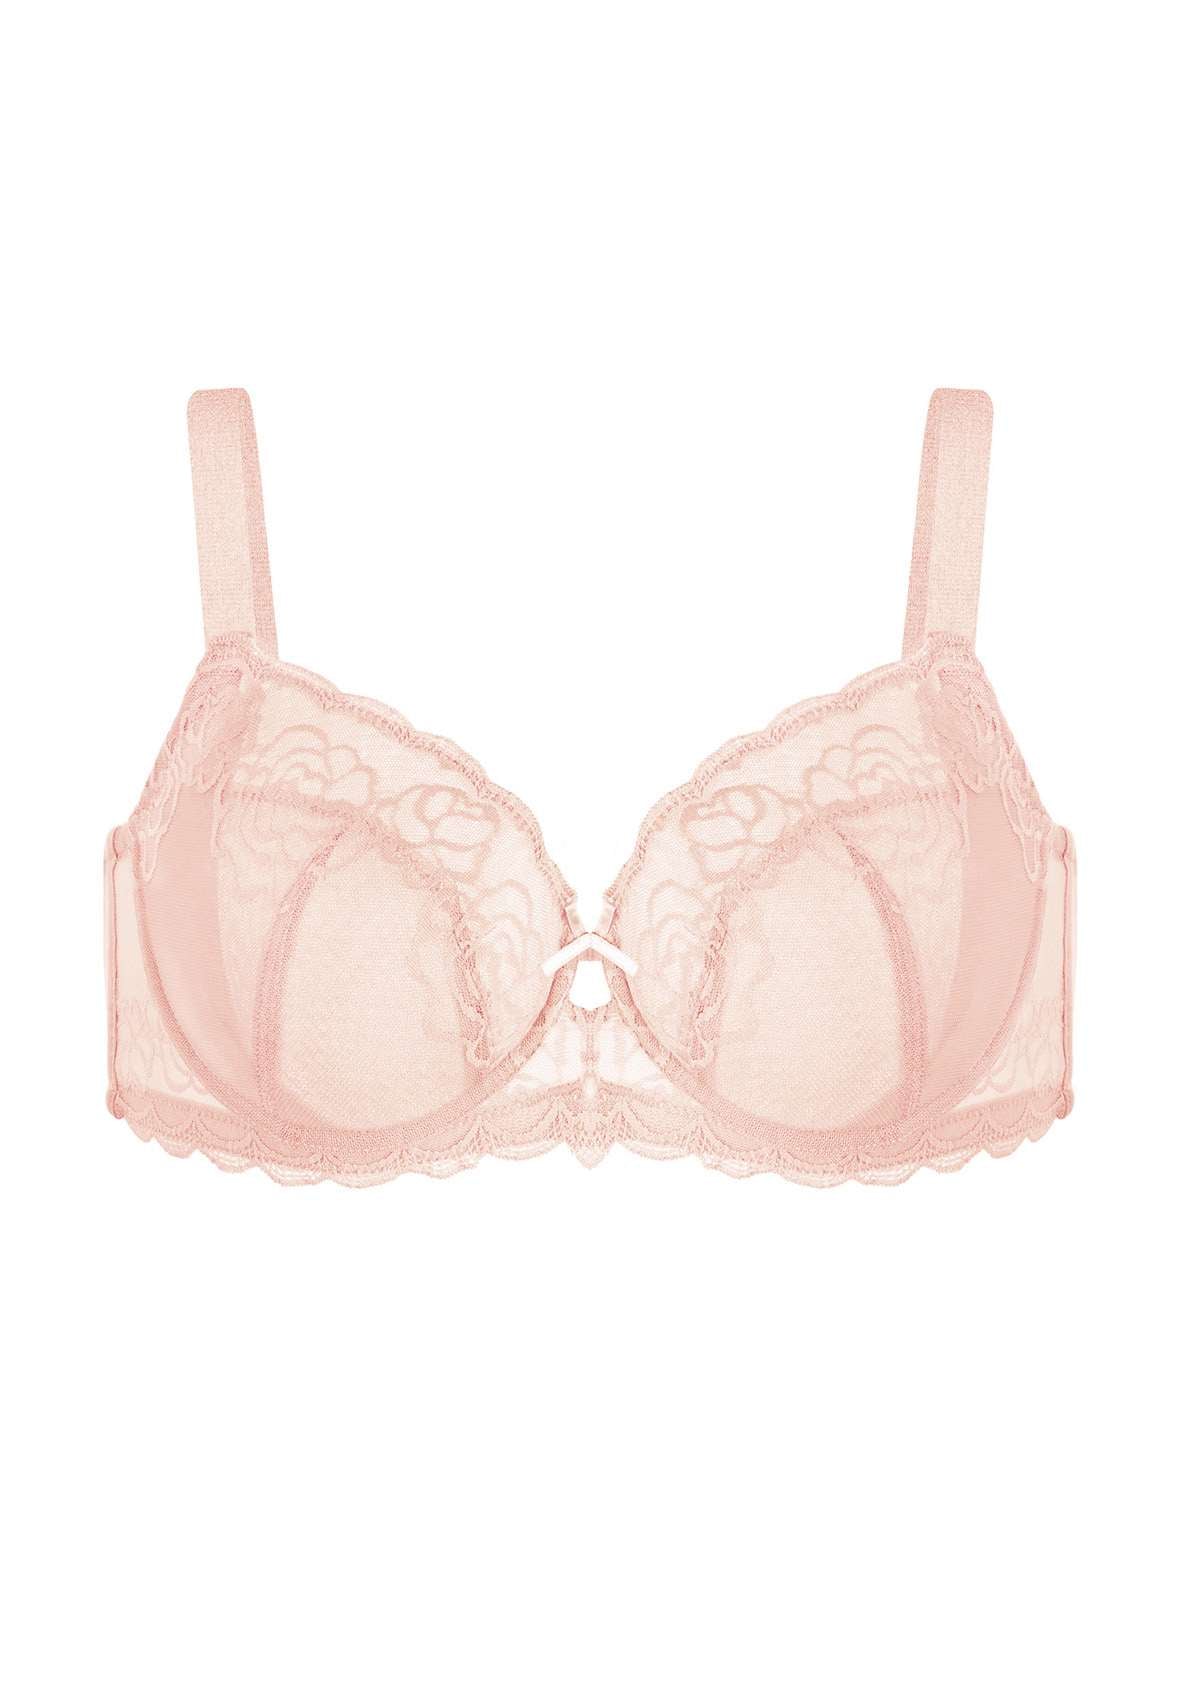 HSIA Rosa Bonica Sheer Lace Mesh Unlined Thin Comfy Woman Bra - Pink / 36 / C